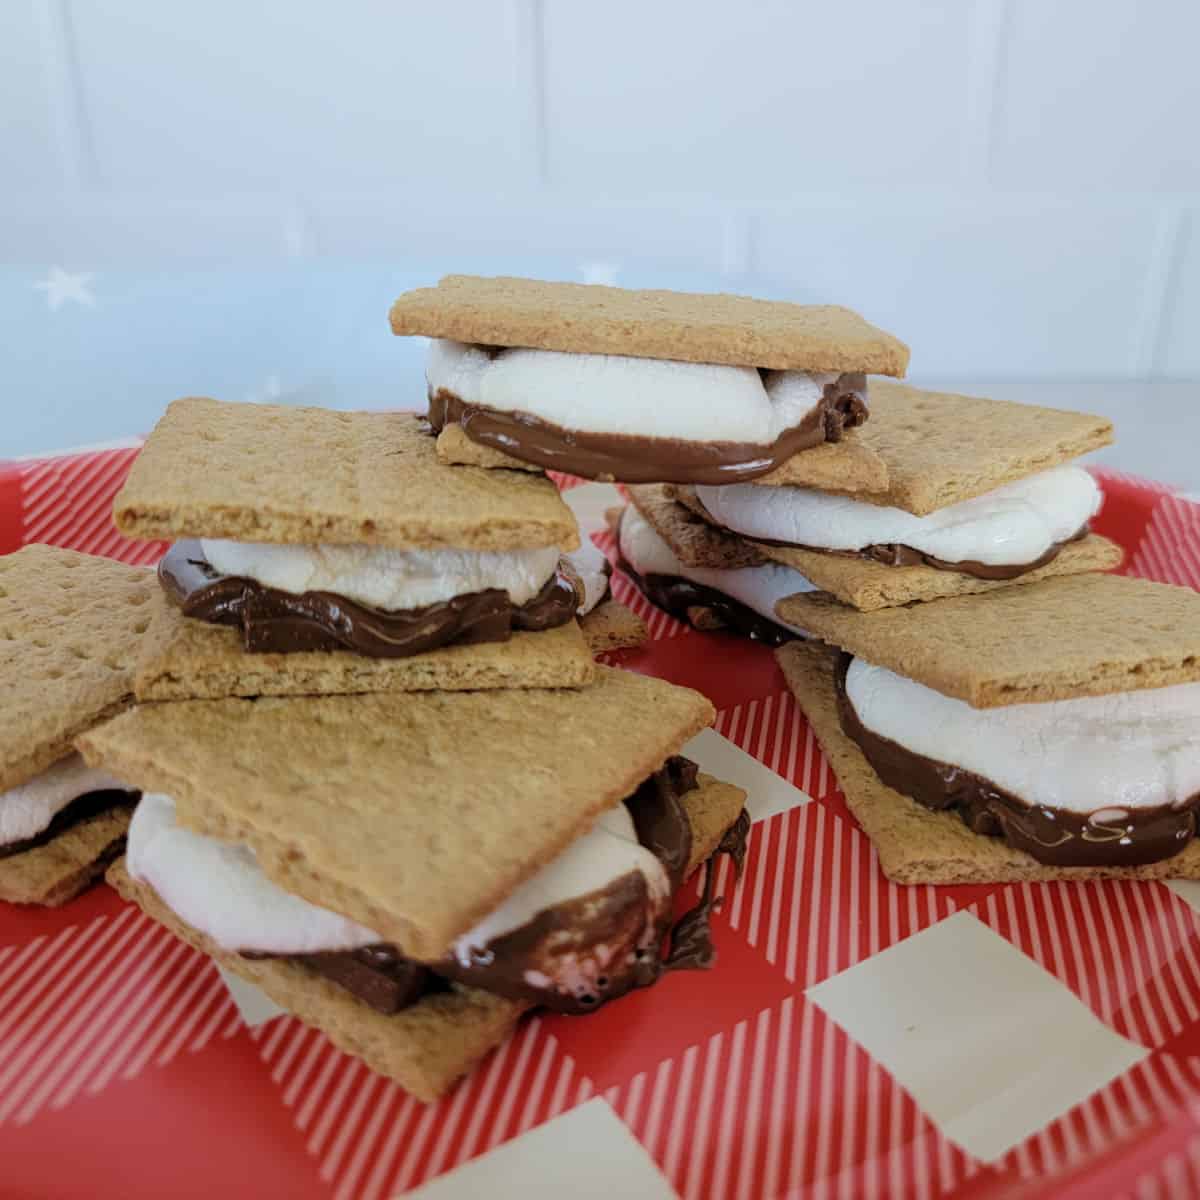 Stack of smores made in the oven on a red checked plate